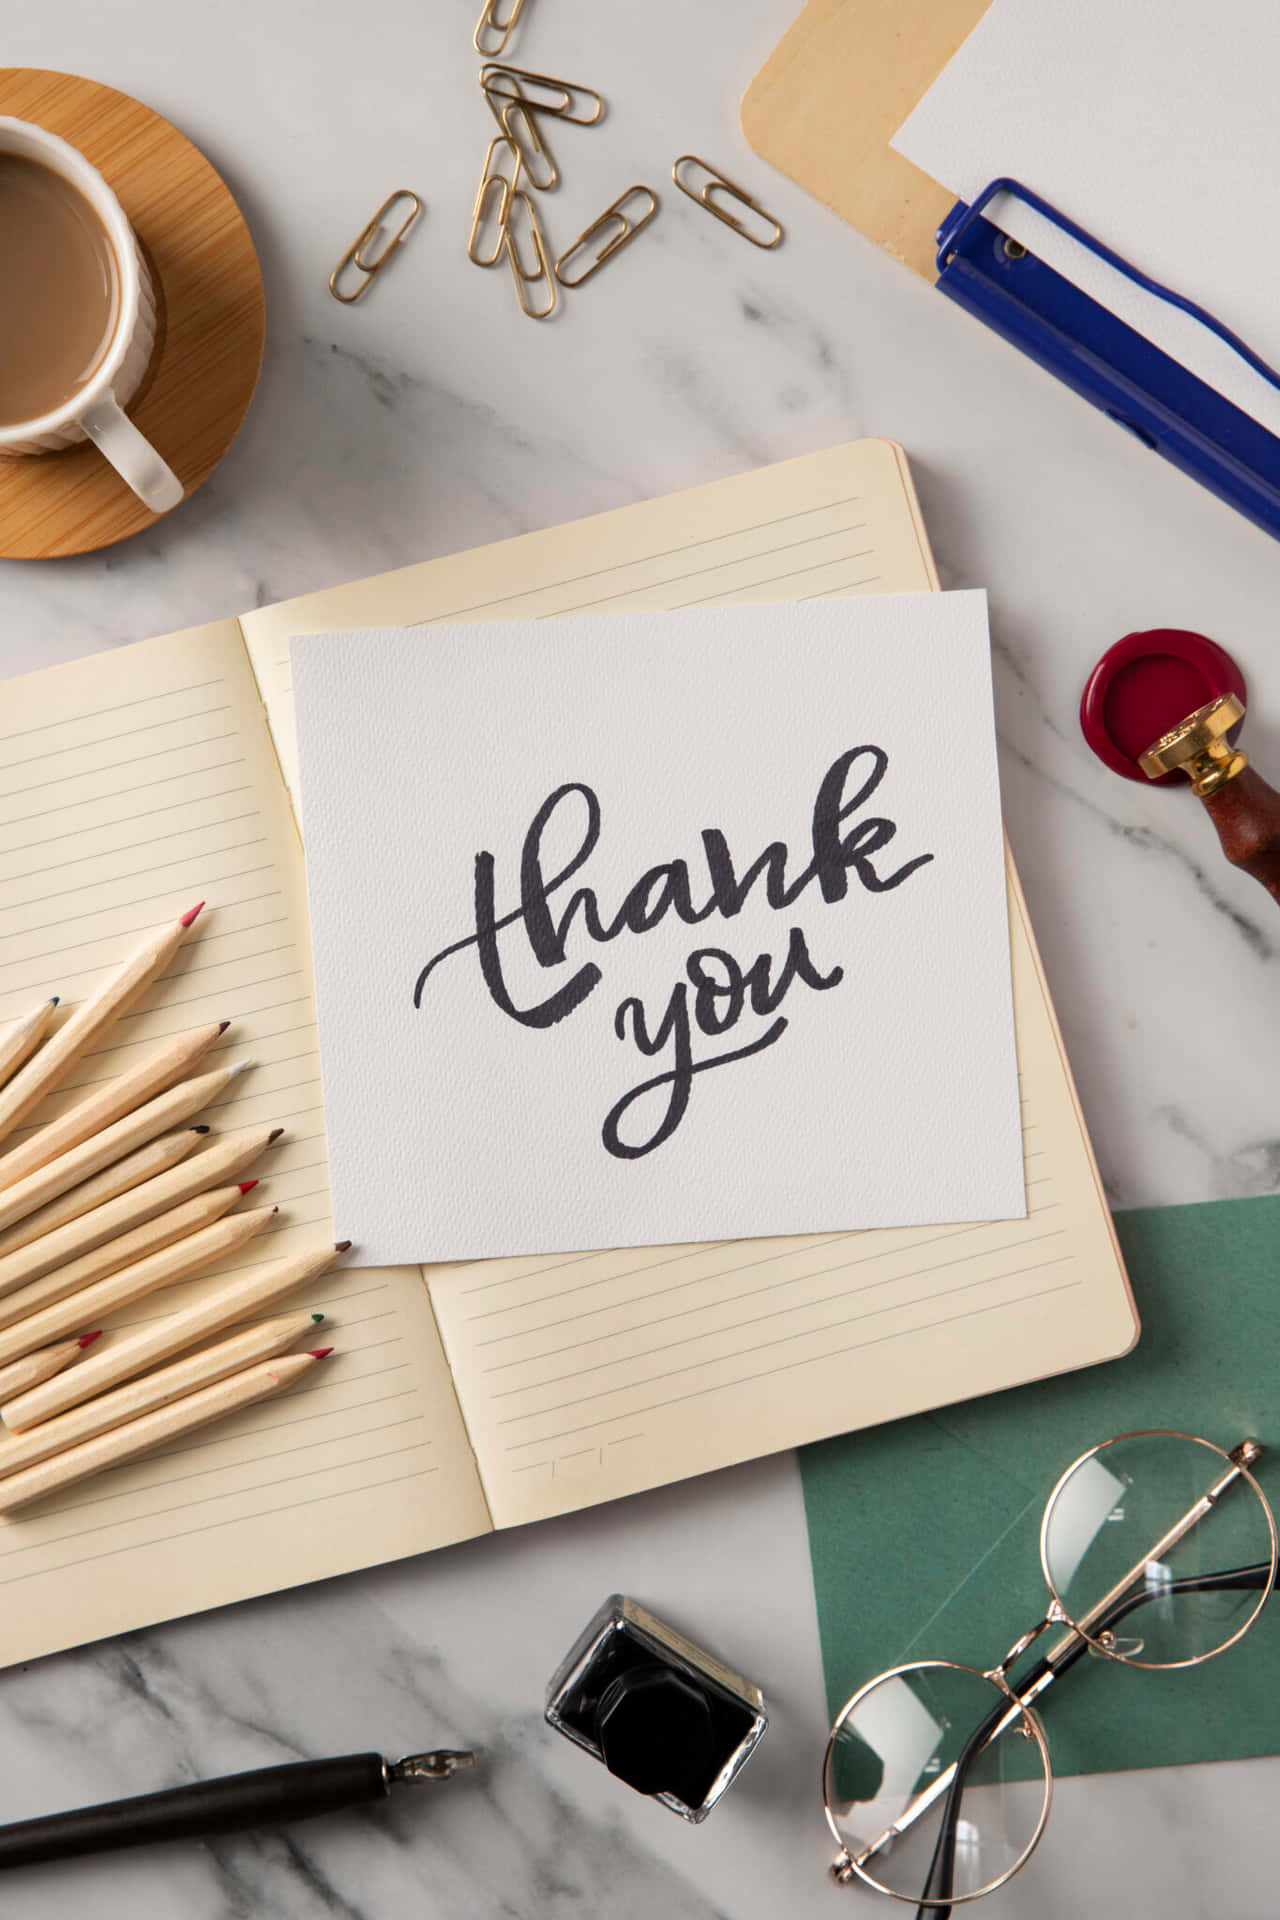 Thank You Card With Pens, Pencils, Glasses And A Notebook